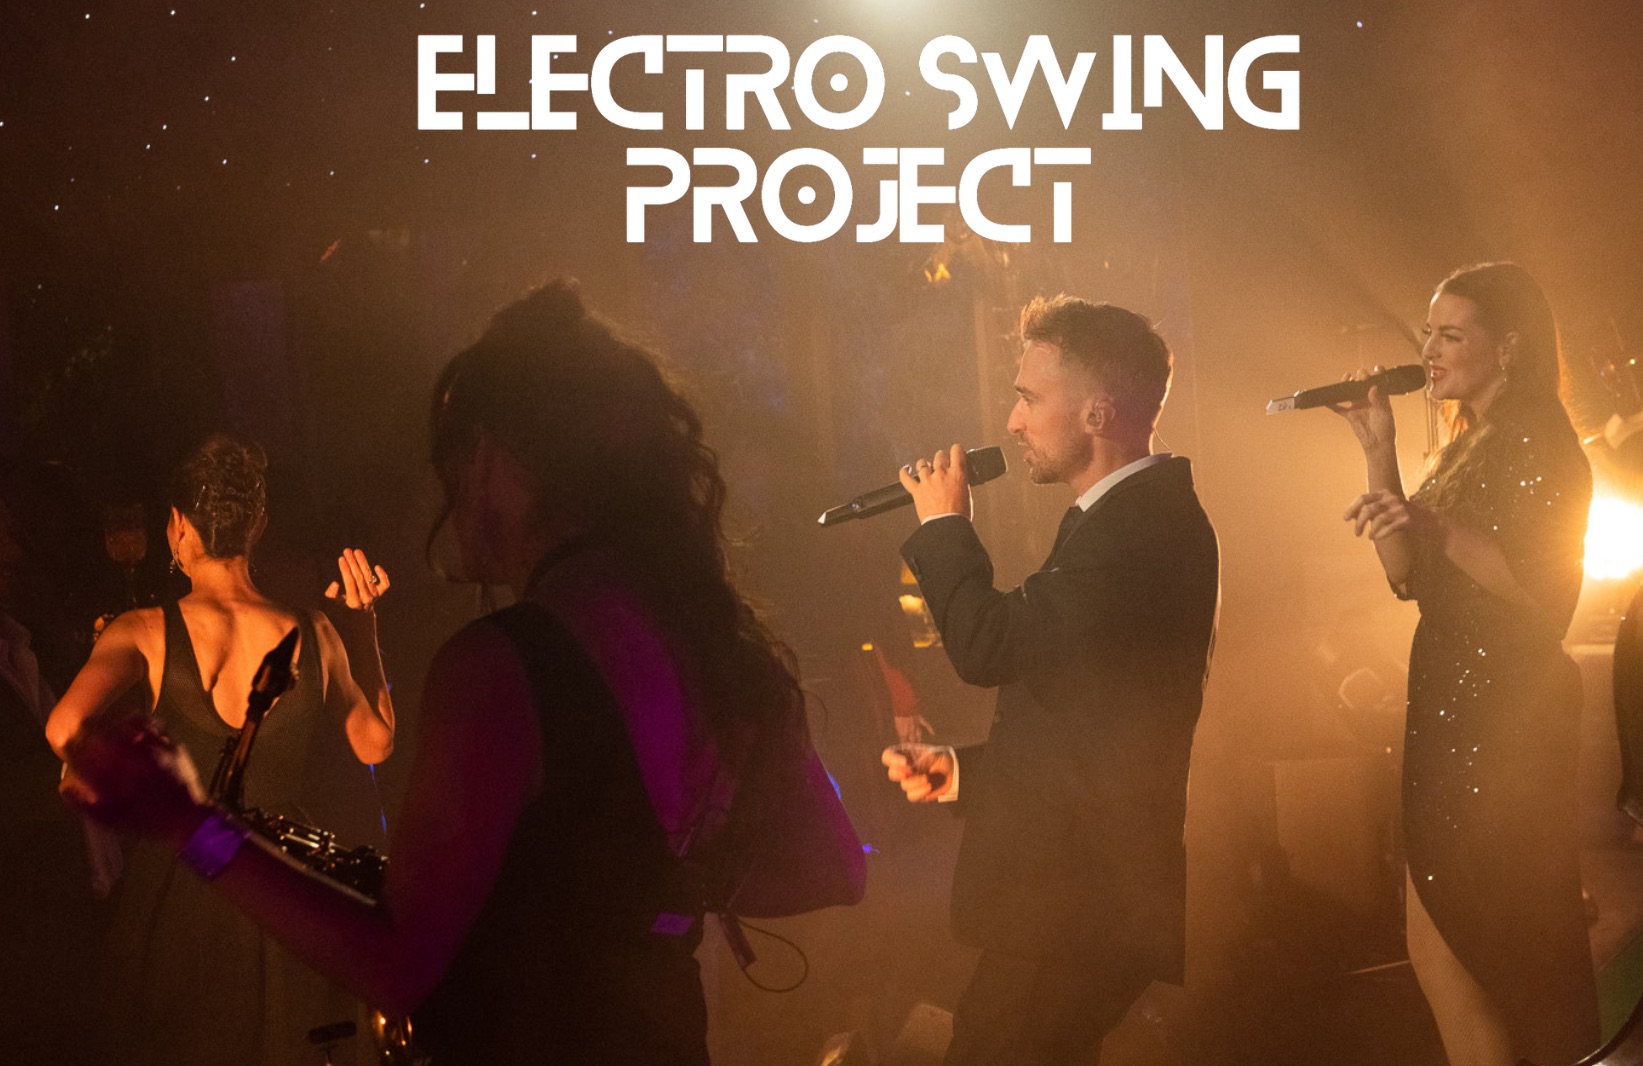 Electro Swing Project